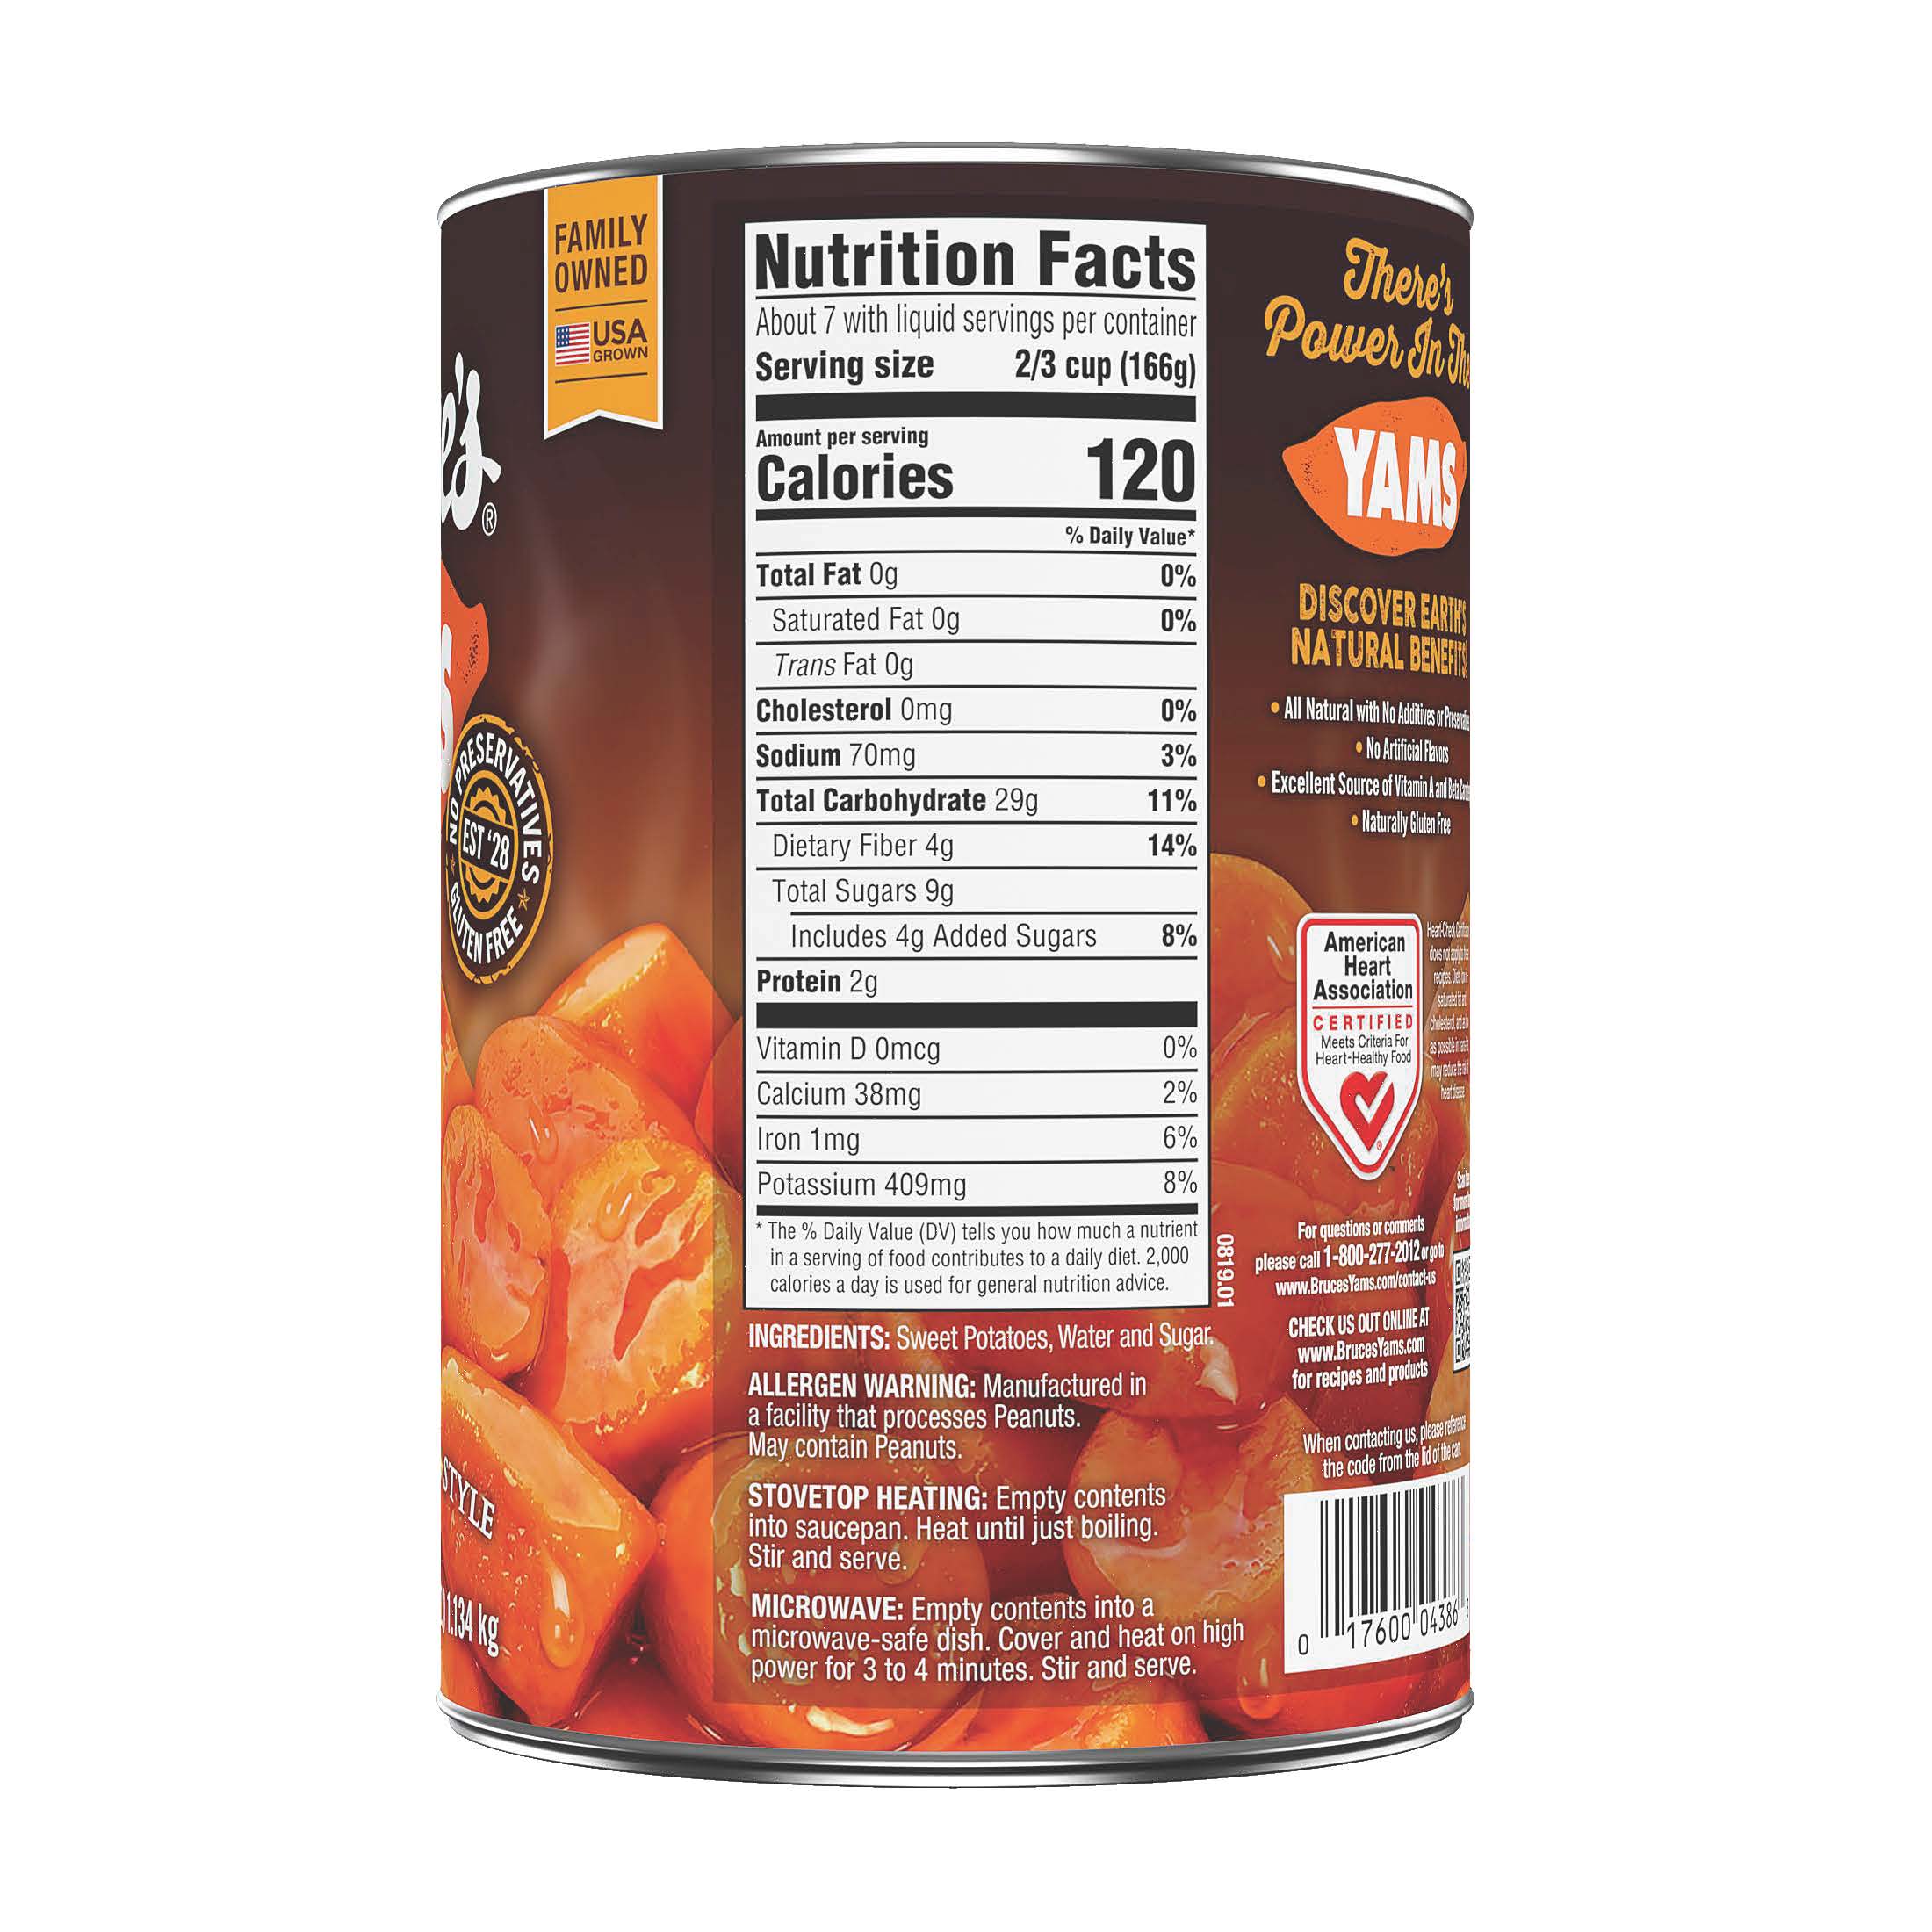 Bruce's Yams Cut Sweet Potatoes in Syrup, Canned Vegetables, 40 oz - image 3 of 6